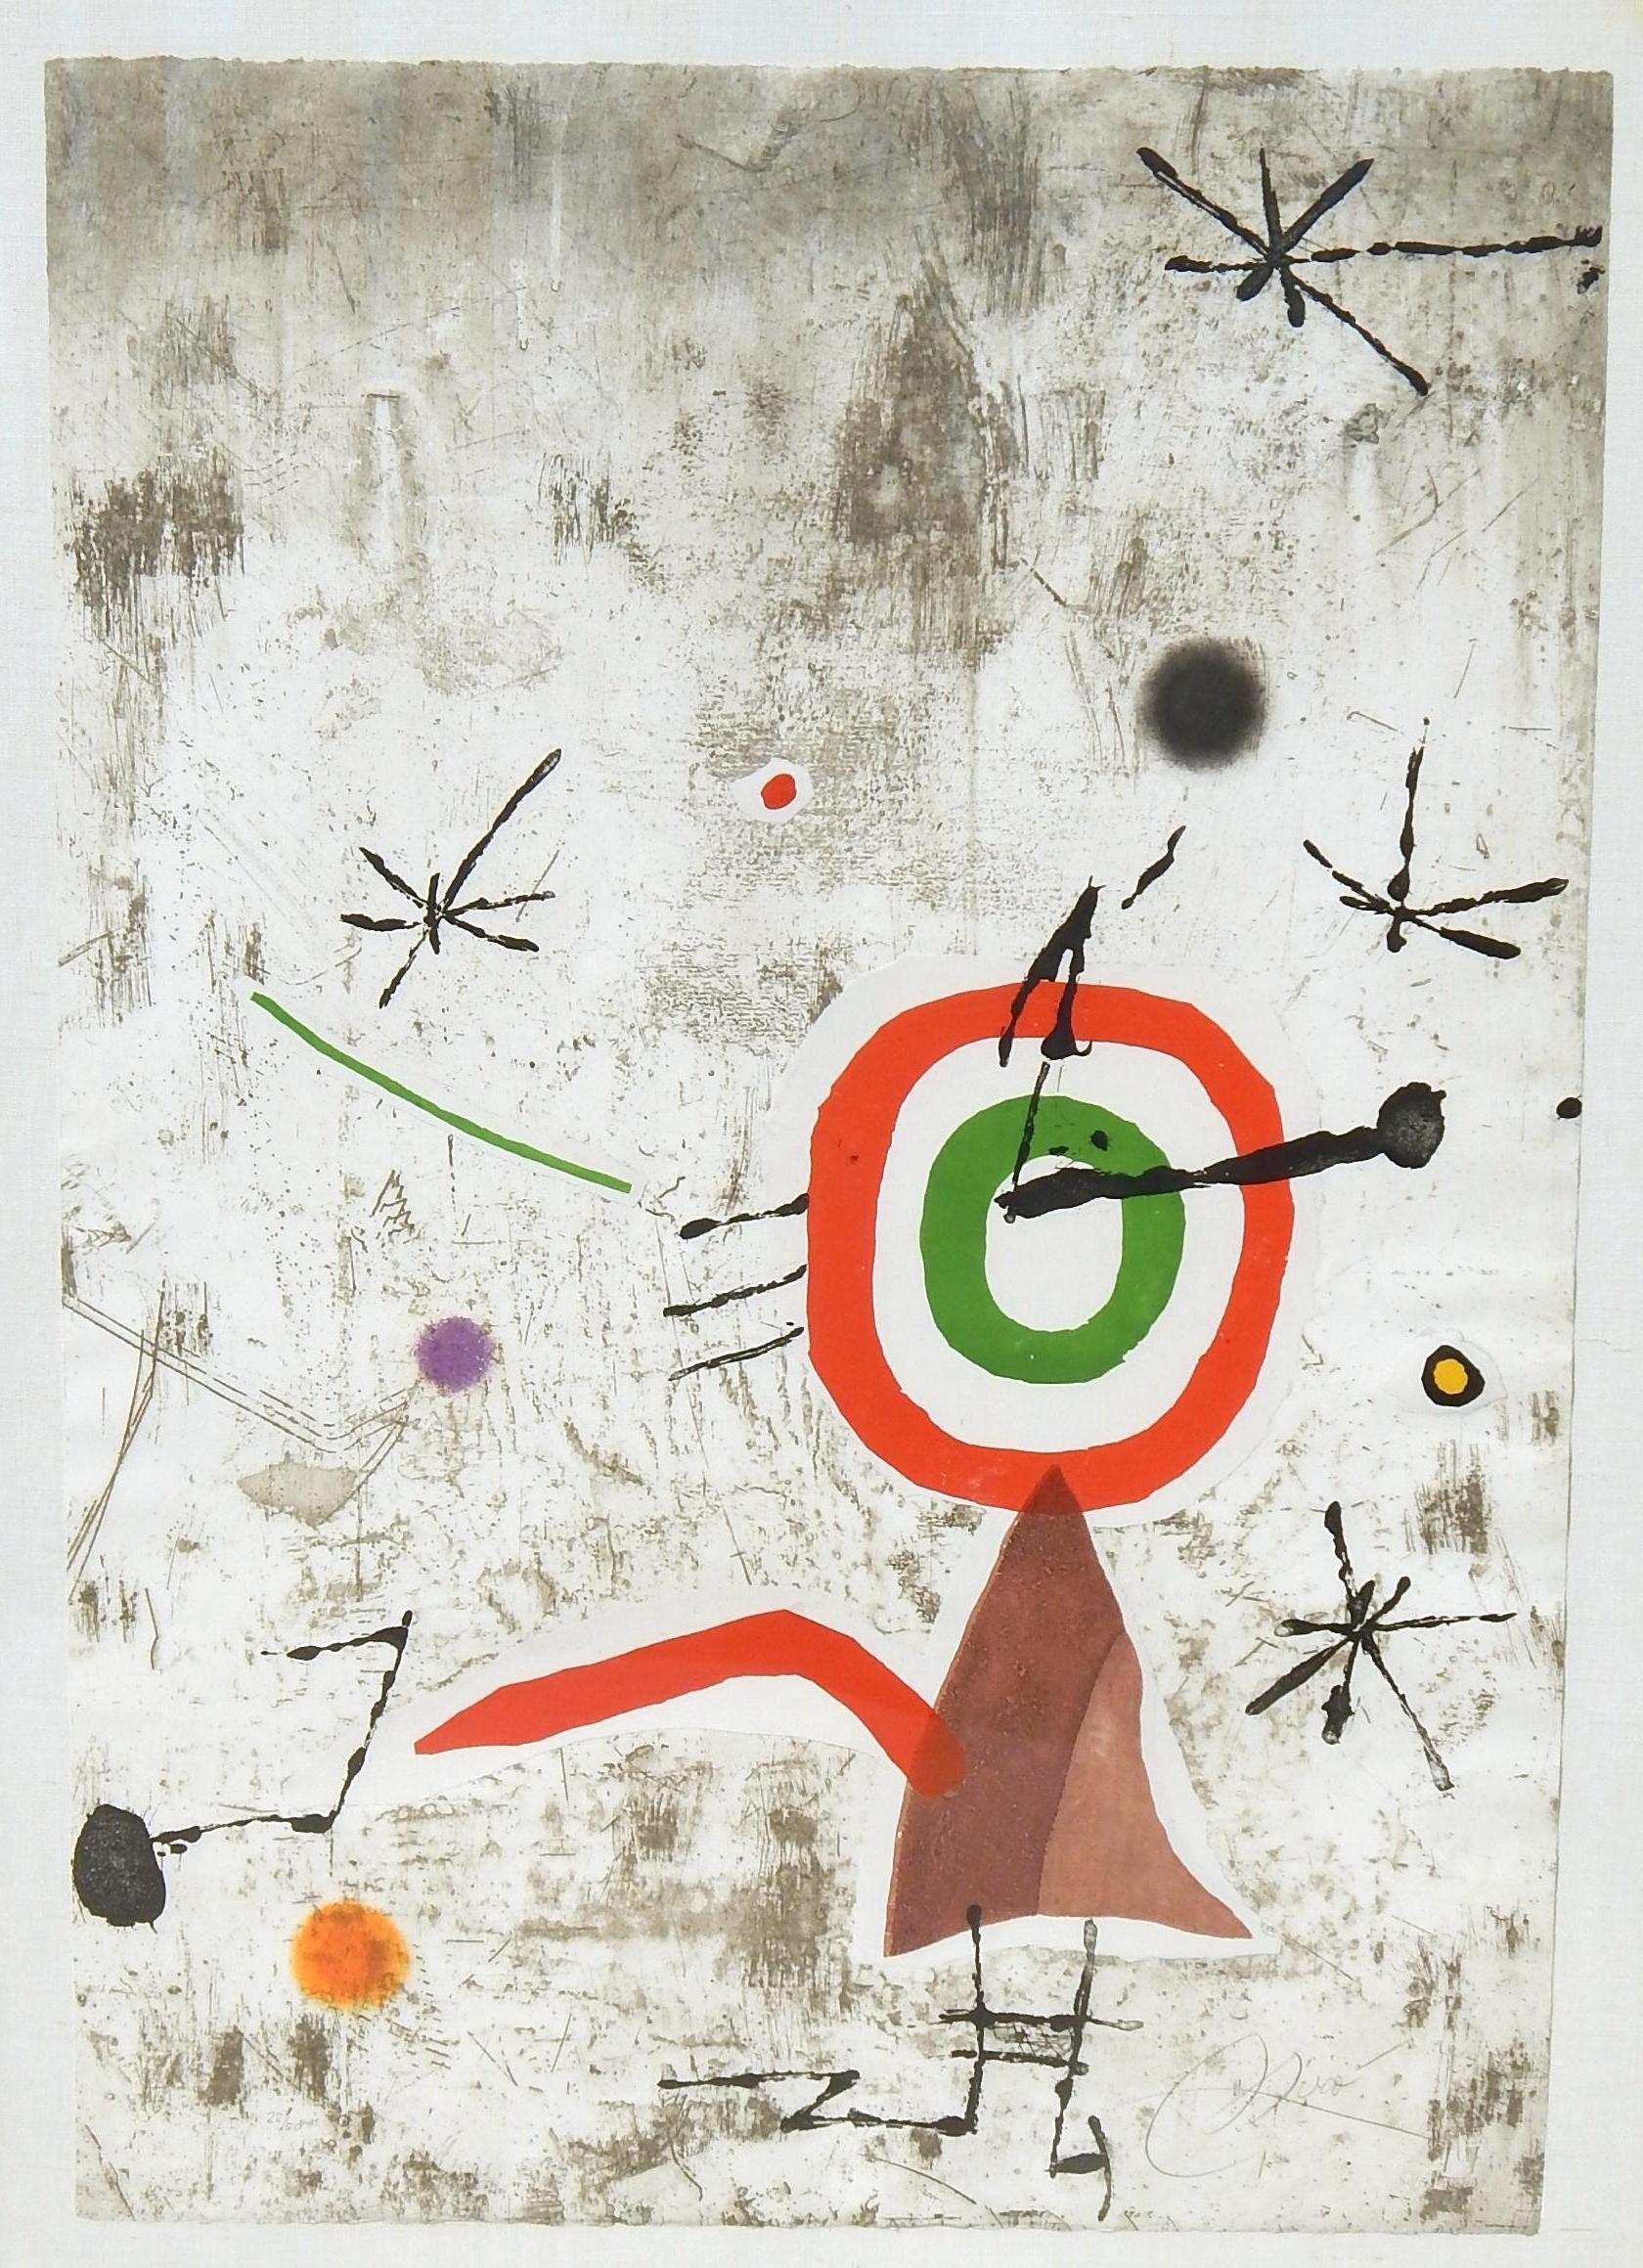 Color etching with collage by Spanish artist Joan Miró, (1893-1983)
Title: Personatge I Estels VII (figure and stars)
Medium: Color etching and aquatint with collage on paper
Measures: Sheet 35.75 x 24.75 in., frame 42.63